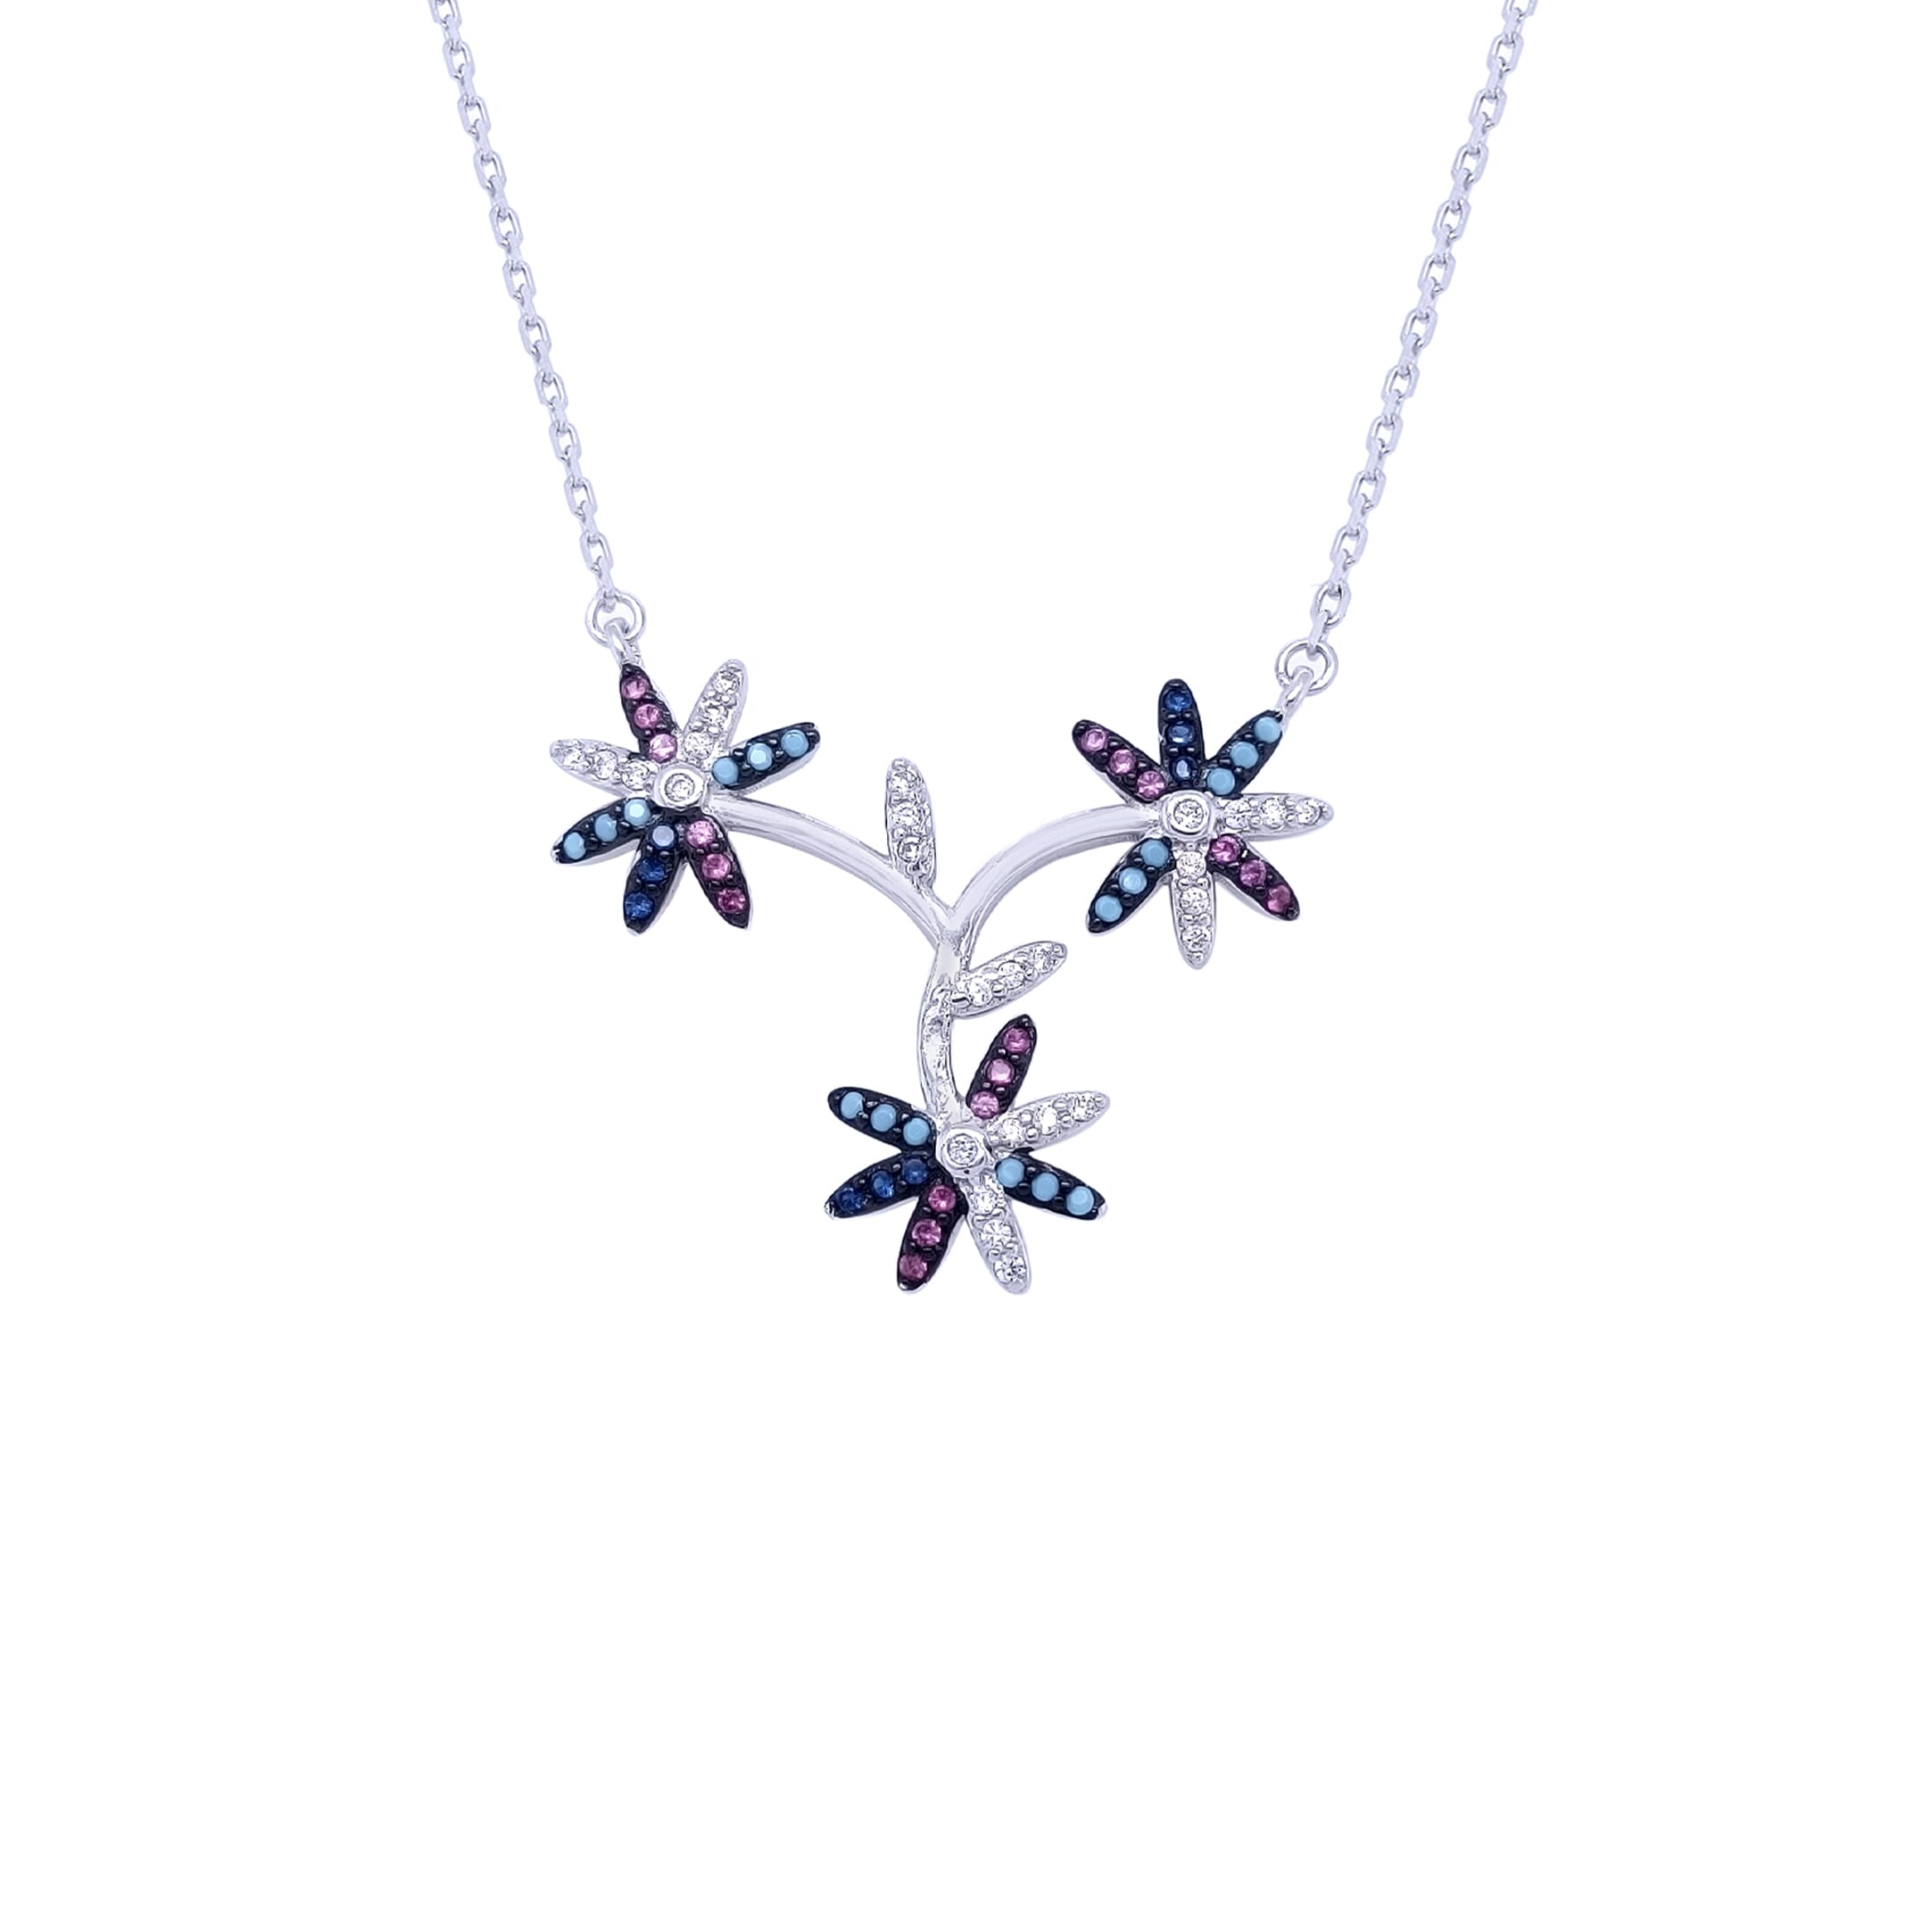 Asfour 925 Sterling Silver Necklace With Three Colored Flowers Design